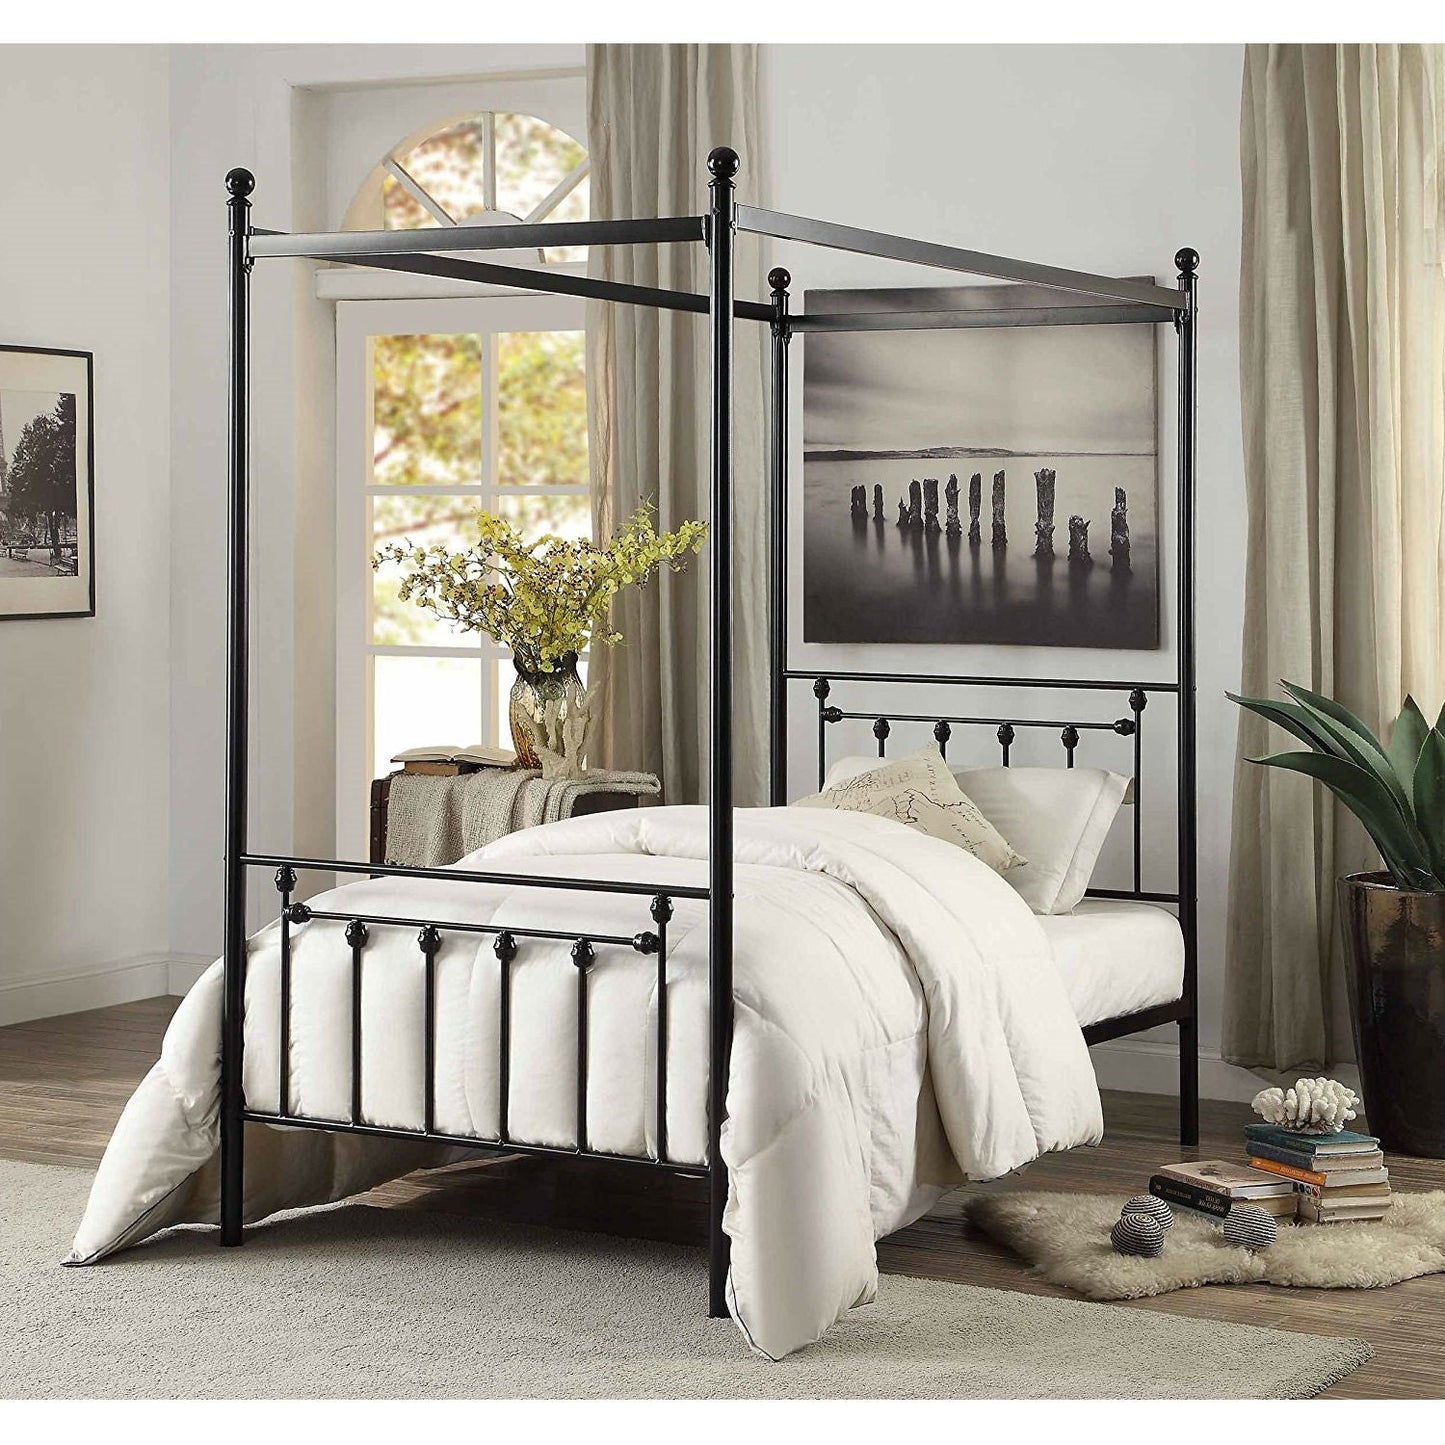 Bedroom > Bed Frames > Canopy Beds - Twin Size Sturdy Metal Canopy Bed Frame In Black Metal Finish